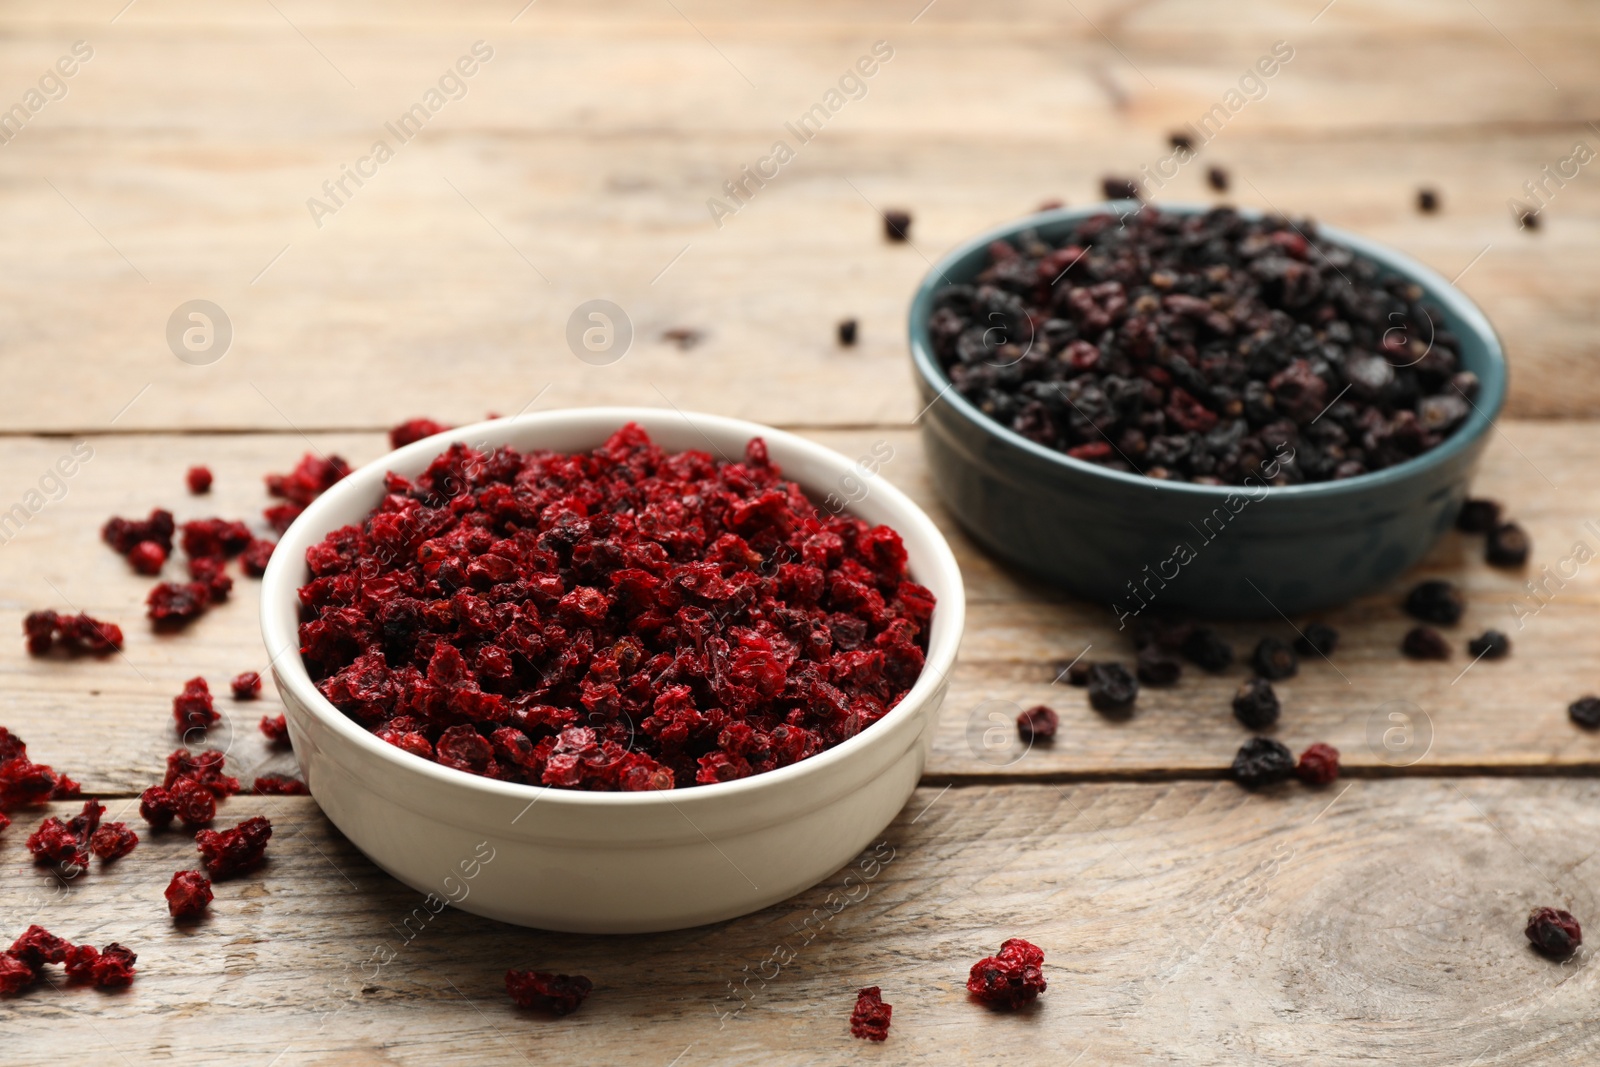 Photo of Dried red and black currant berries on wooden table